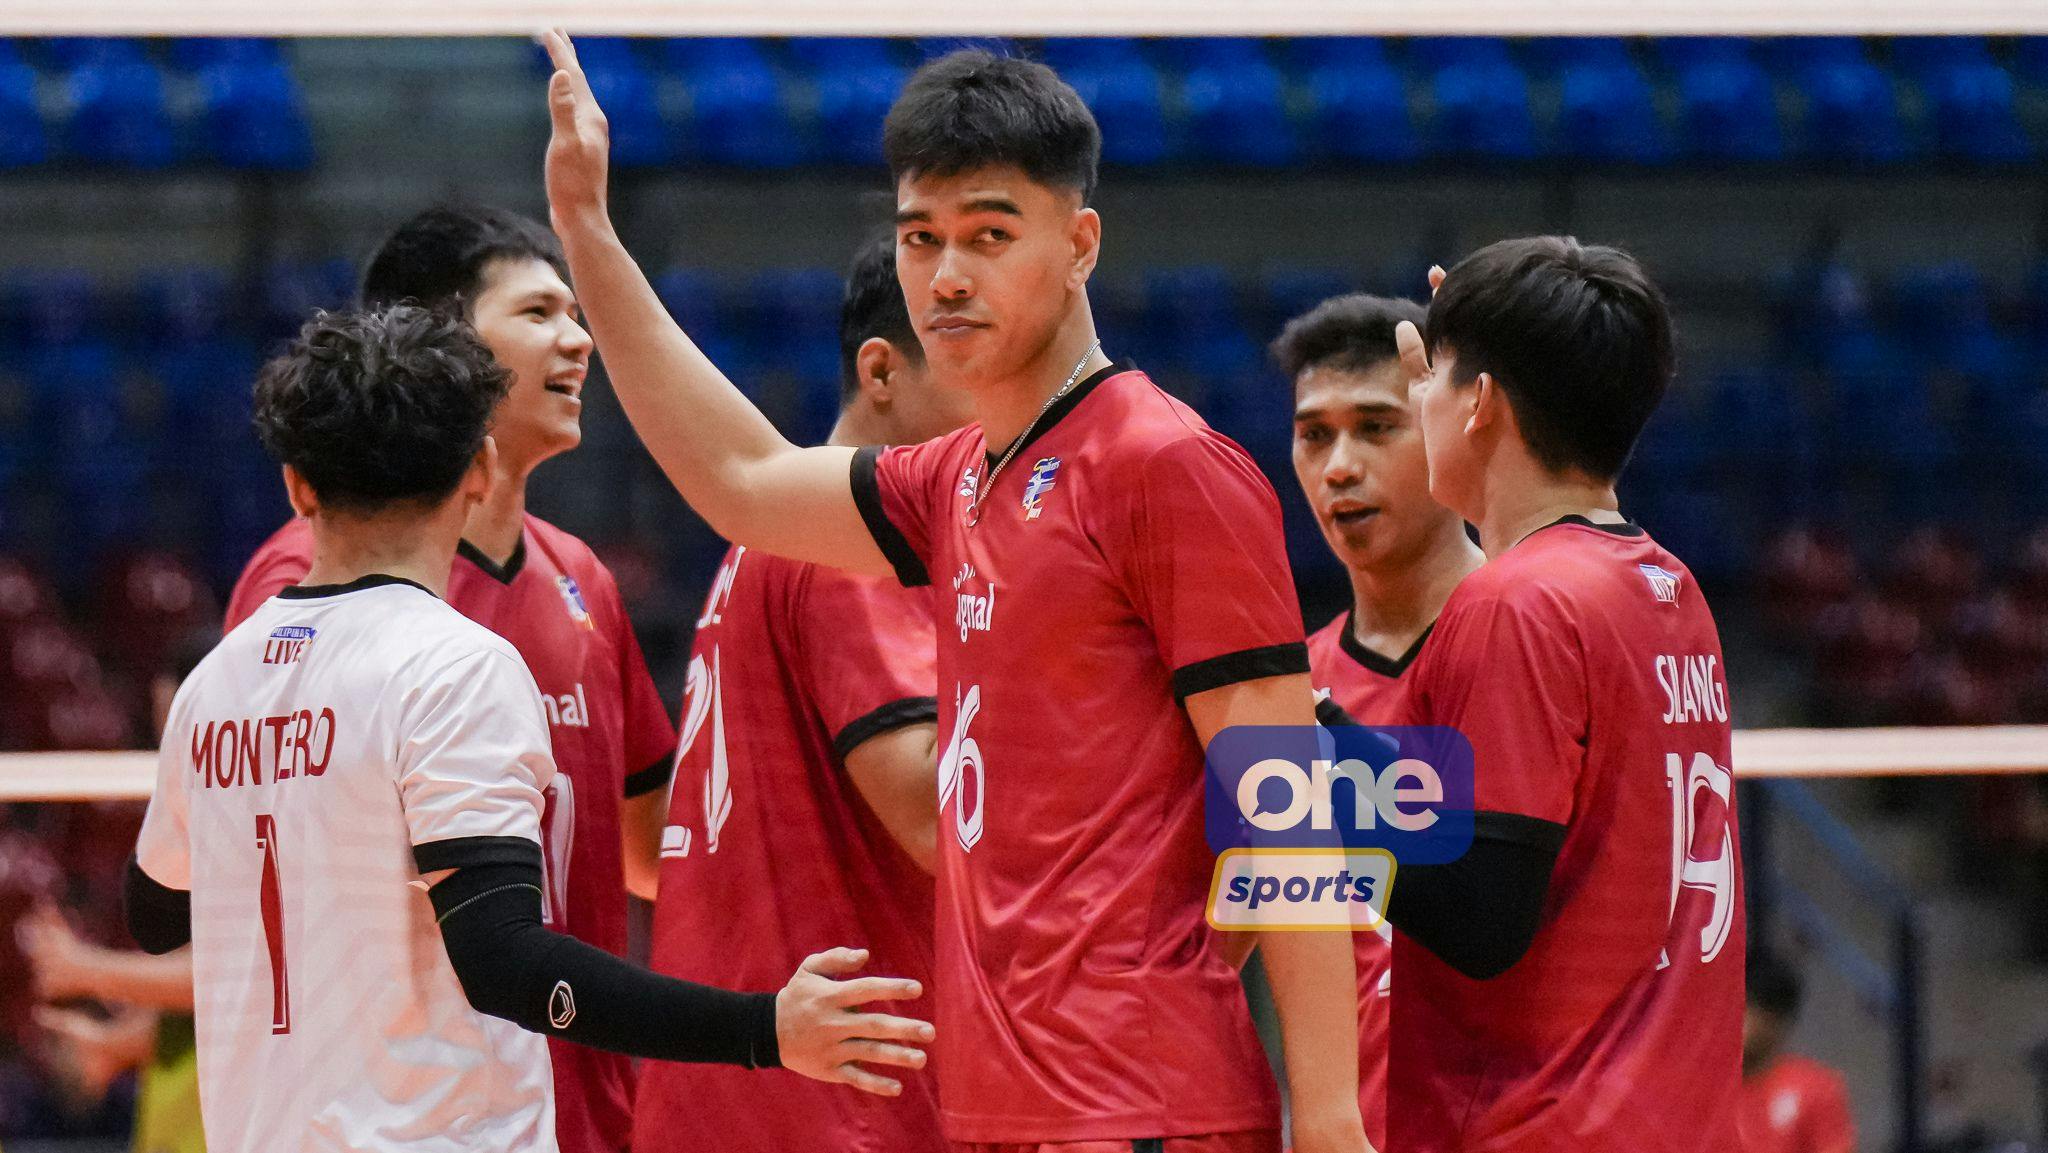 Spikers’ Turf: Cignal completes prelims sweep with rout of Maverick, as Bryan Bagunas makes return